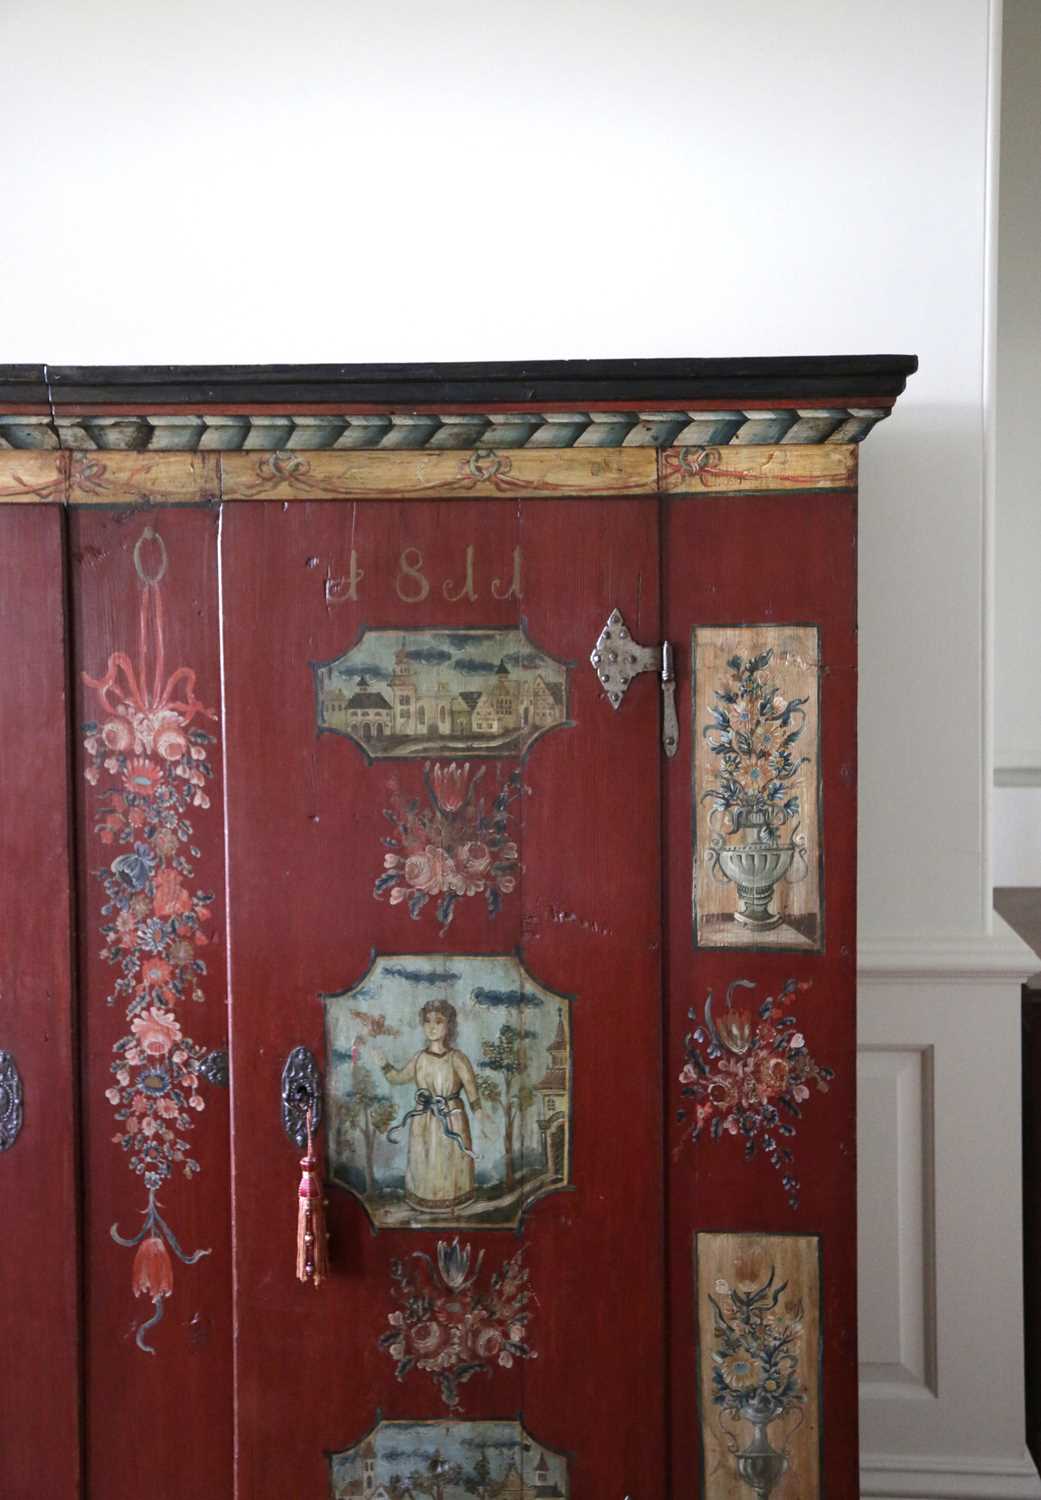 A NORTH EUROPEAN PAINTED MARRIAGE ARMOIRE POSSIBLY TYROLEAN, EARLY 19TH CENTURY, DATED '1811' with a - Image 3 of 3